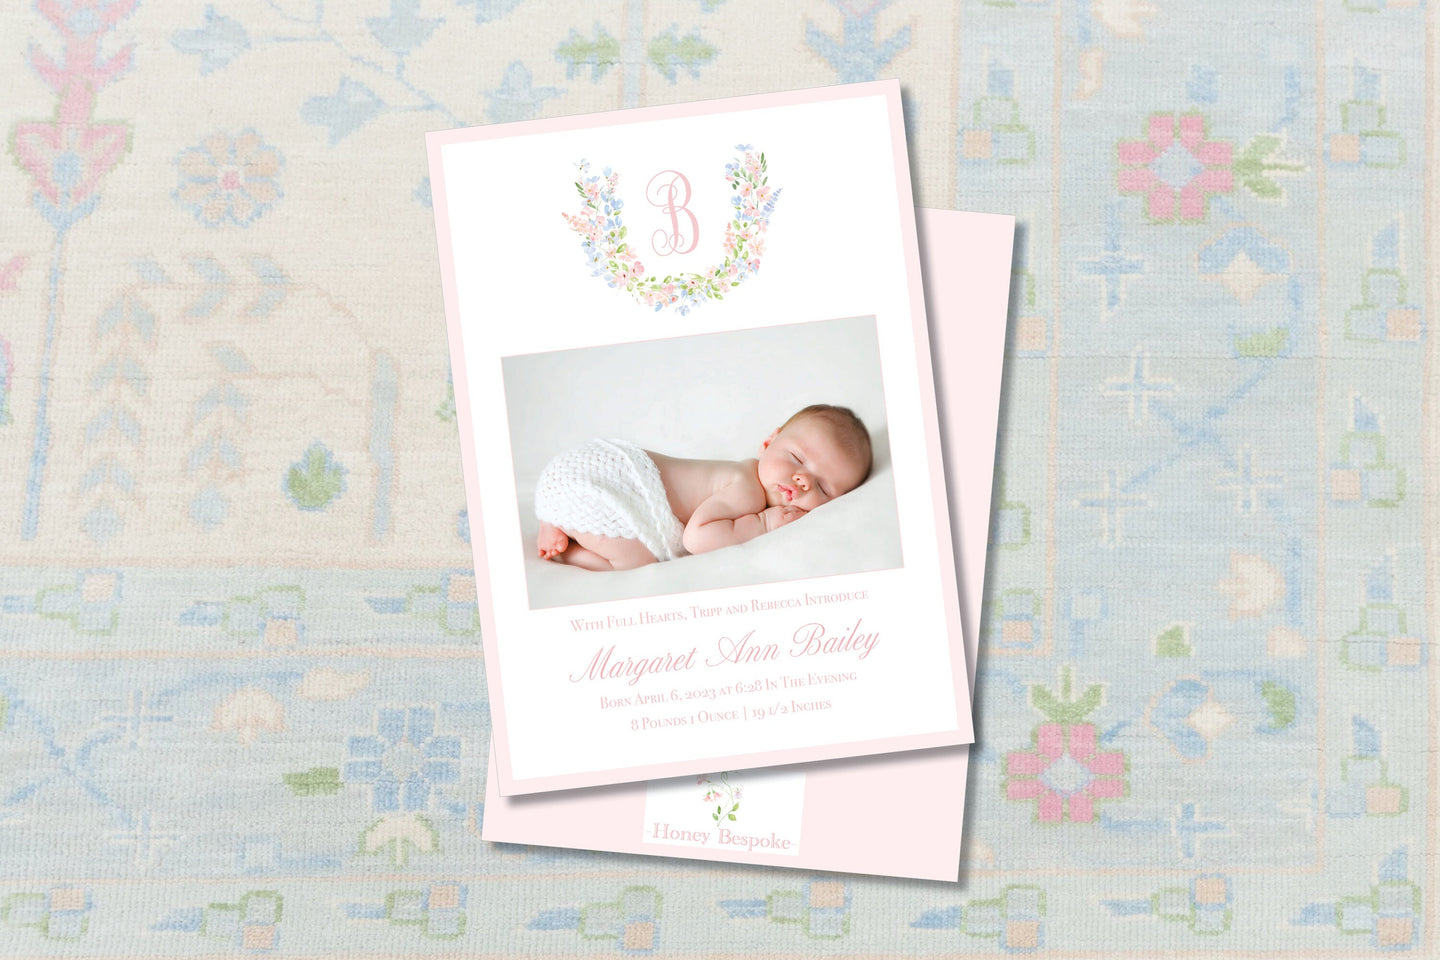 Watercolor Personalized Baby Birth Announcement / Watercolor Floral Crest Photo Card / Floral Birth / Girl / Invitation / Preppy / Photo